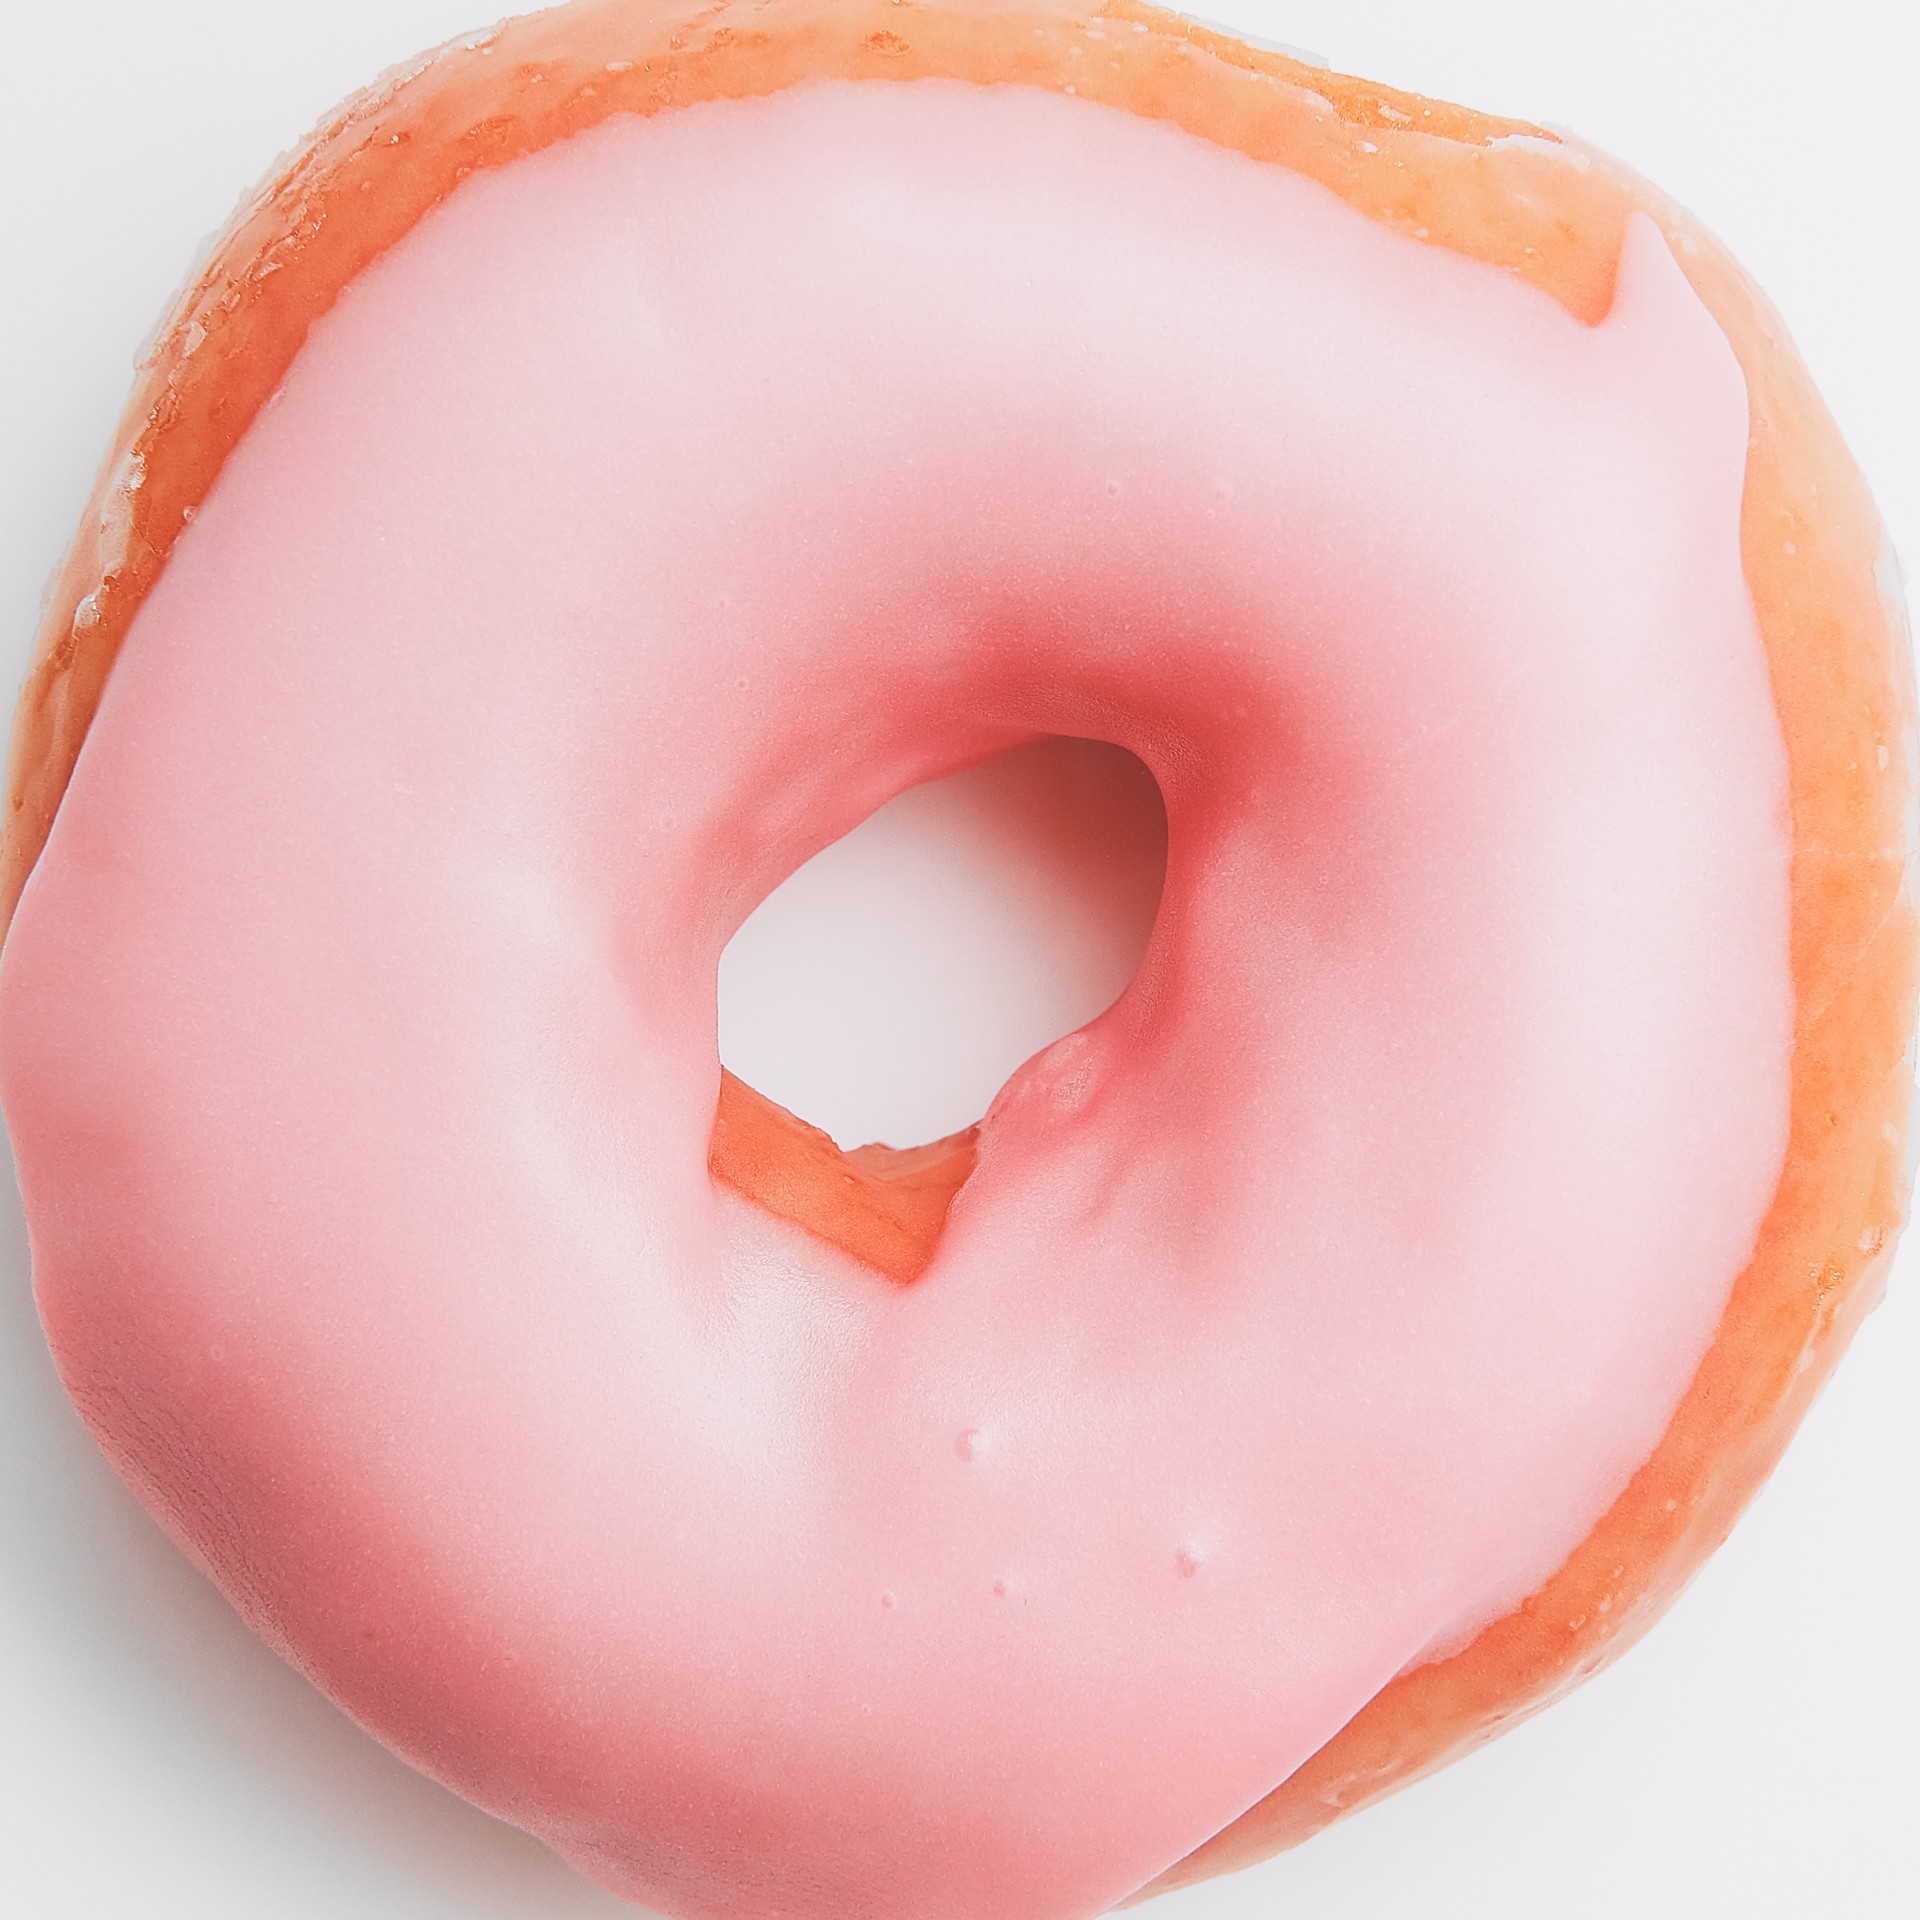 Donut (Strawberry) by Peter Andrew Lusztyk / Refined Sugar